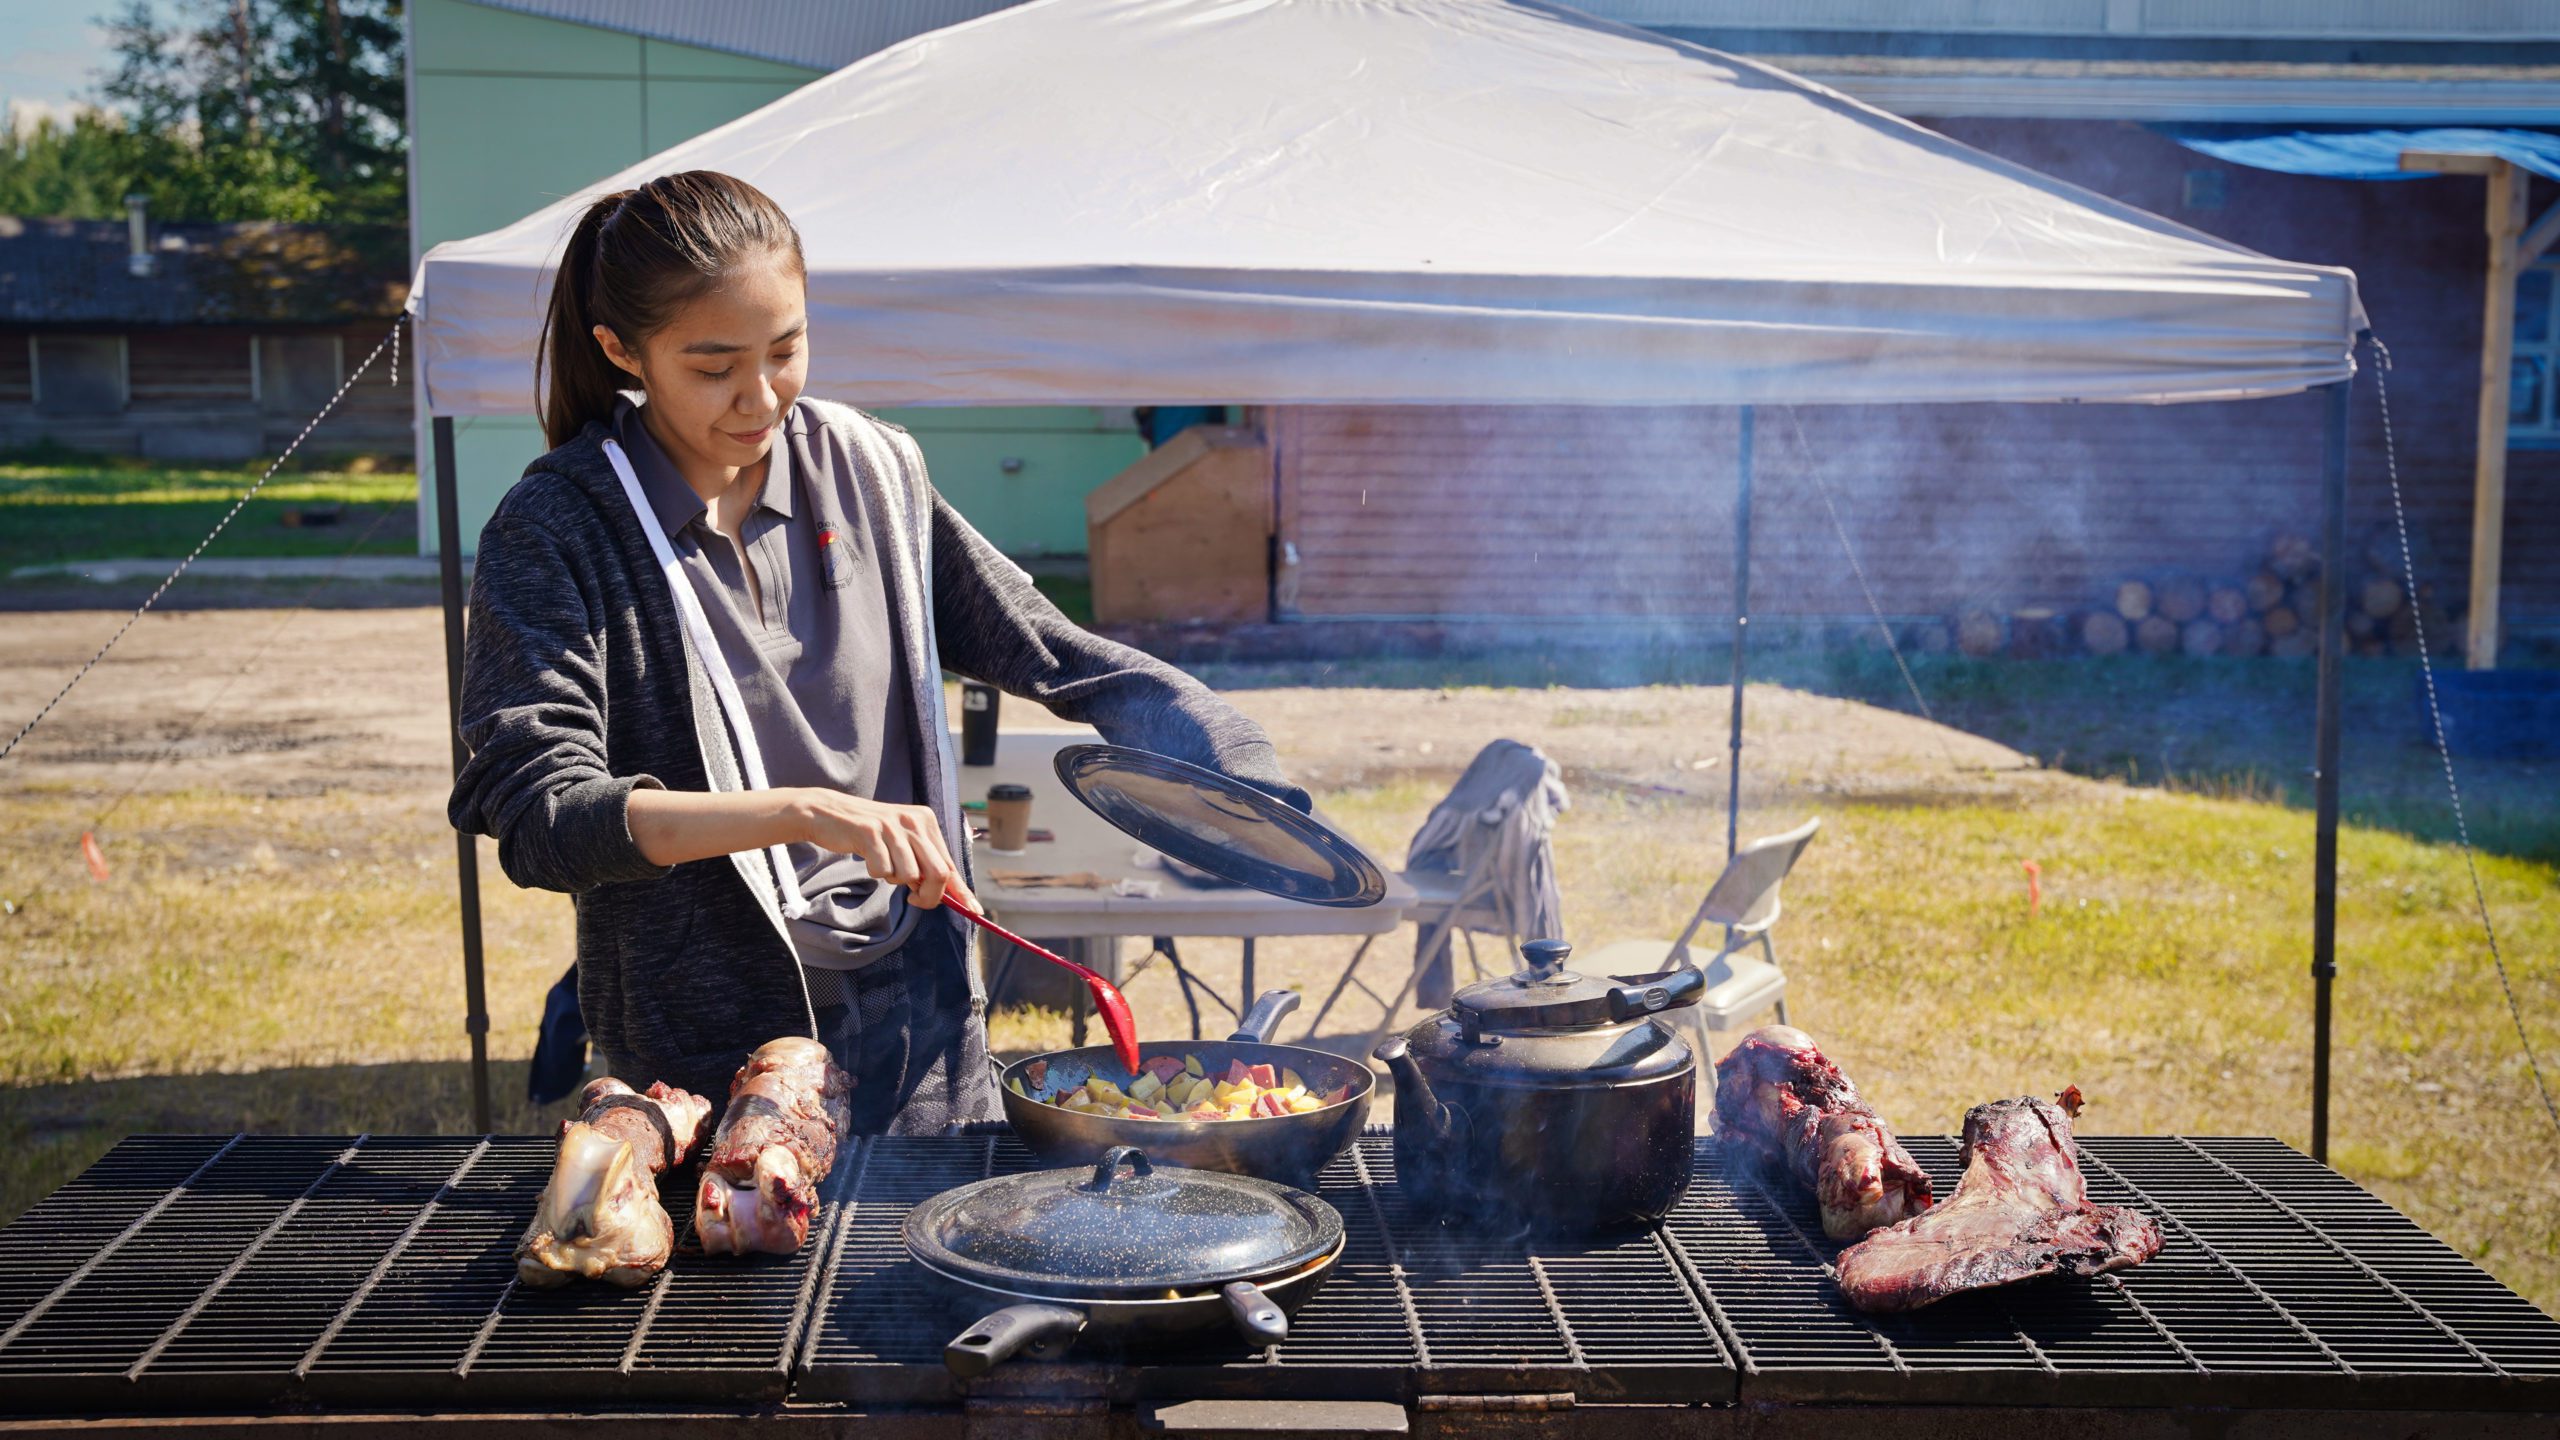 Every day feature a traditional cookout for community members.